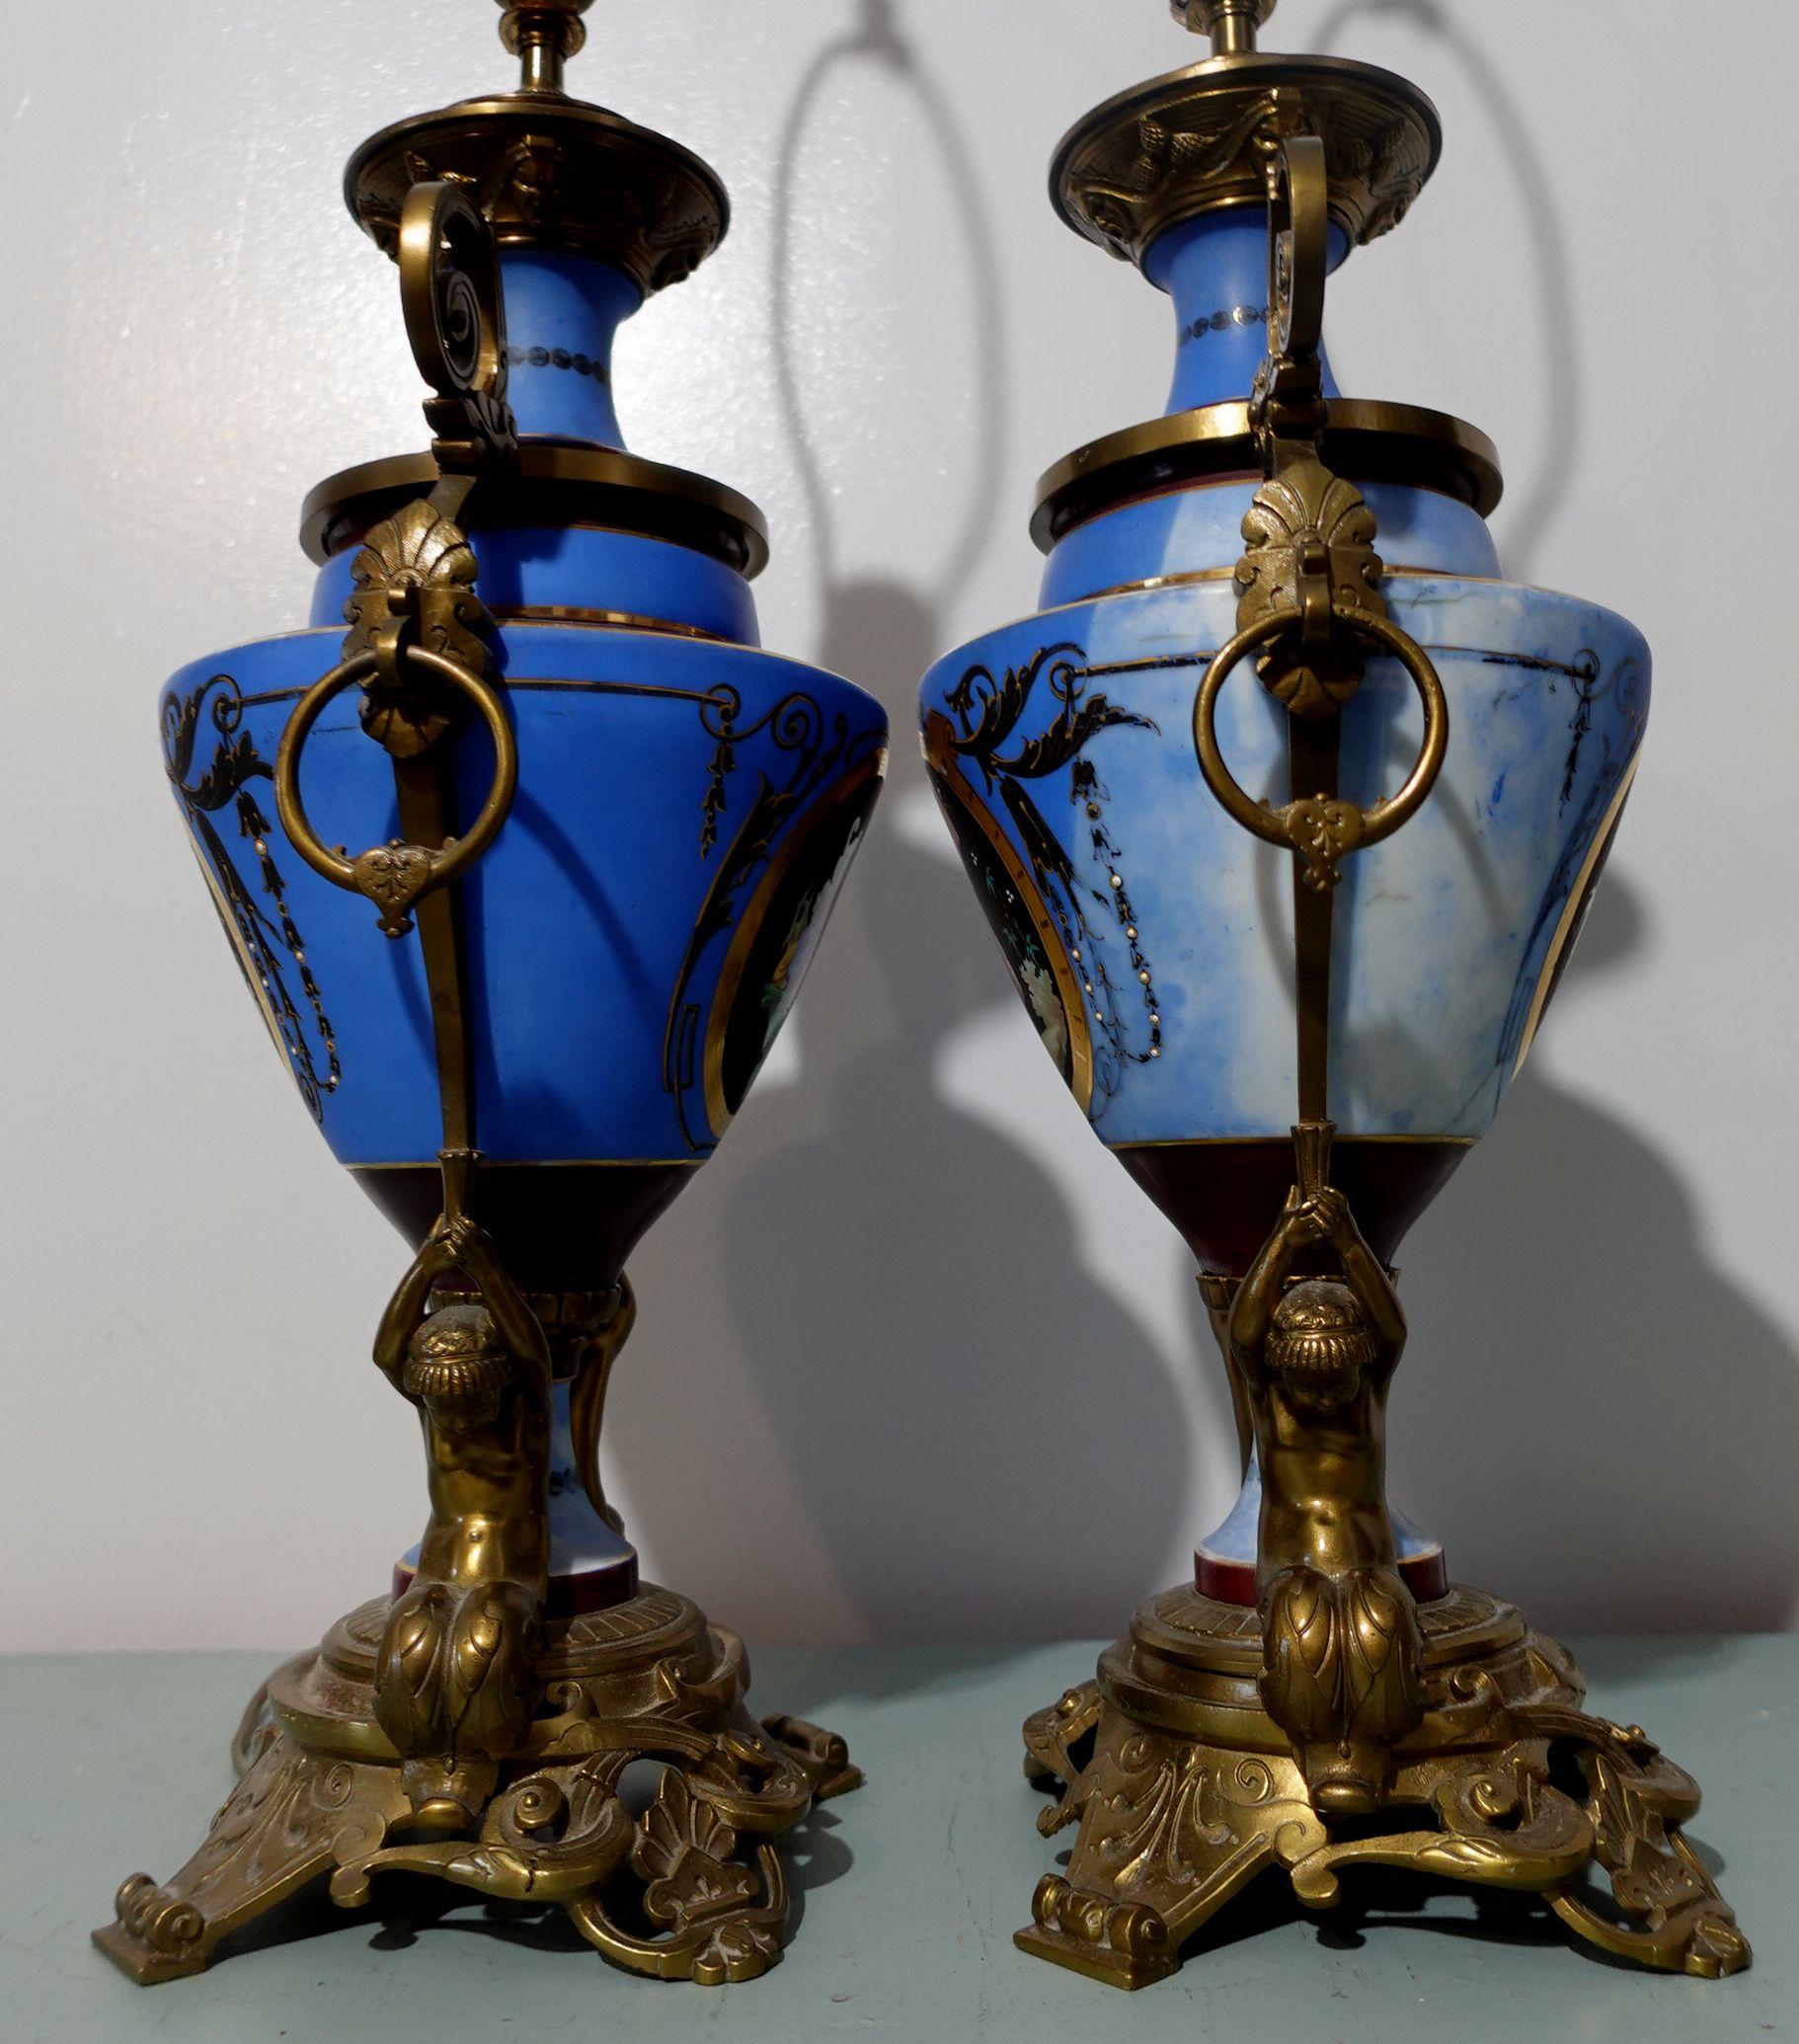 Pair of Neoclassical Style Porcelain and Gilt-Bronze Table Lamps For Sale 6